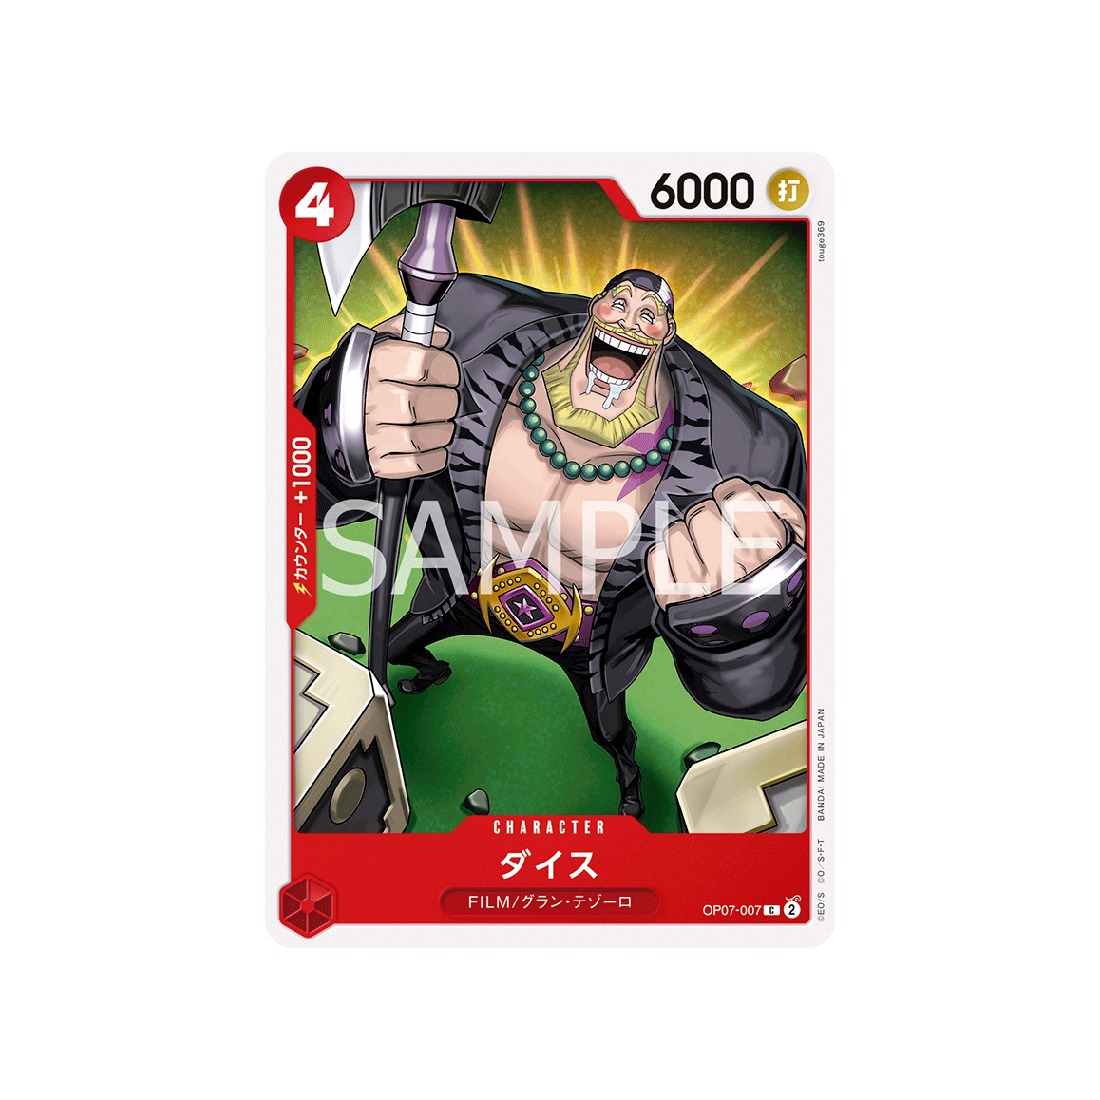 carte-one-piece-card-500-years-in-the-future-op07-007-dice-c-